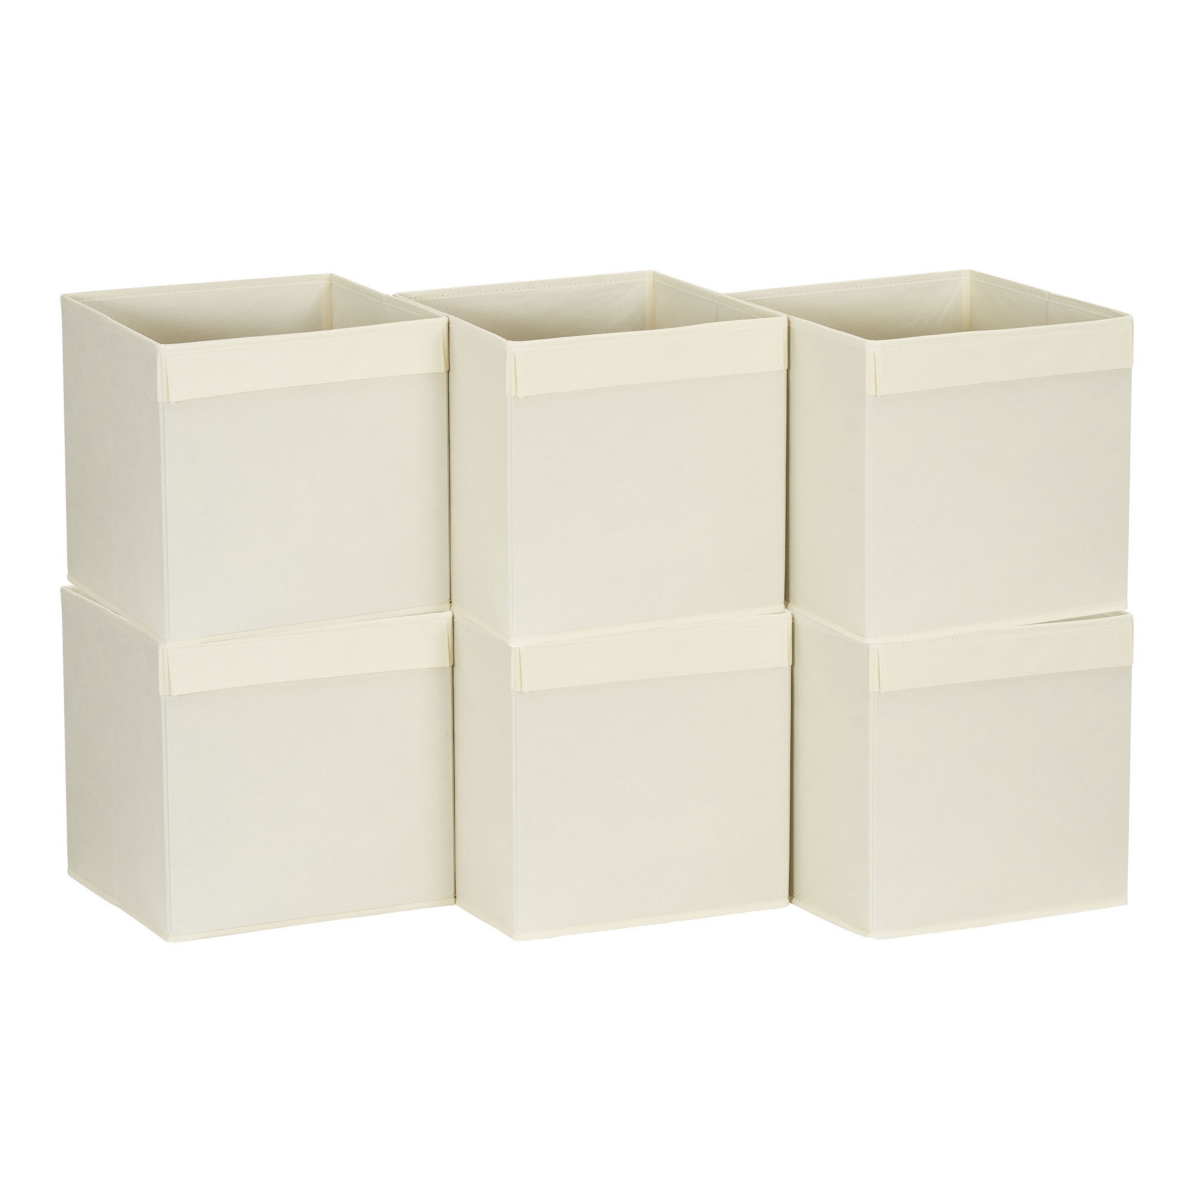 Lip Pull Collapsible Fabric Cube, Natural - Natural